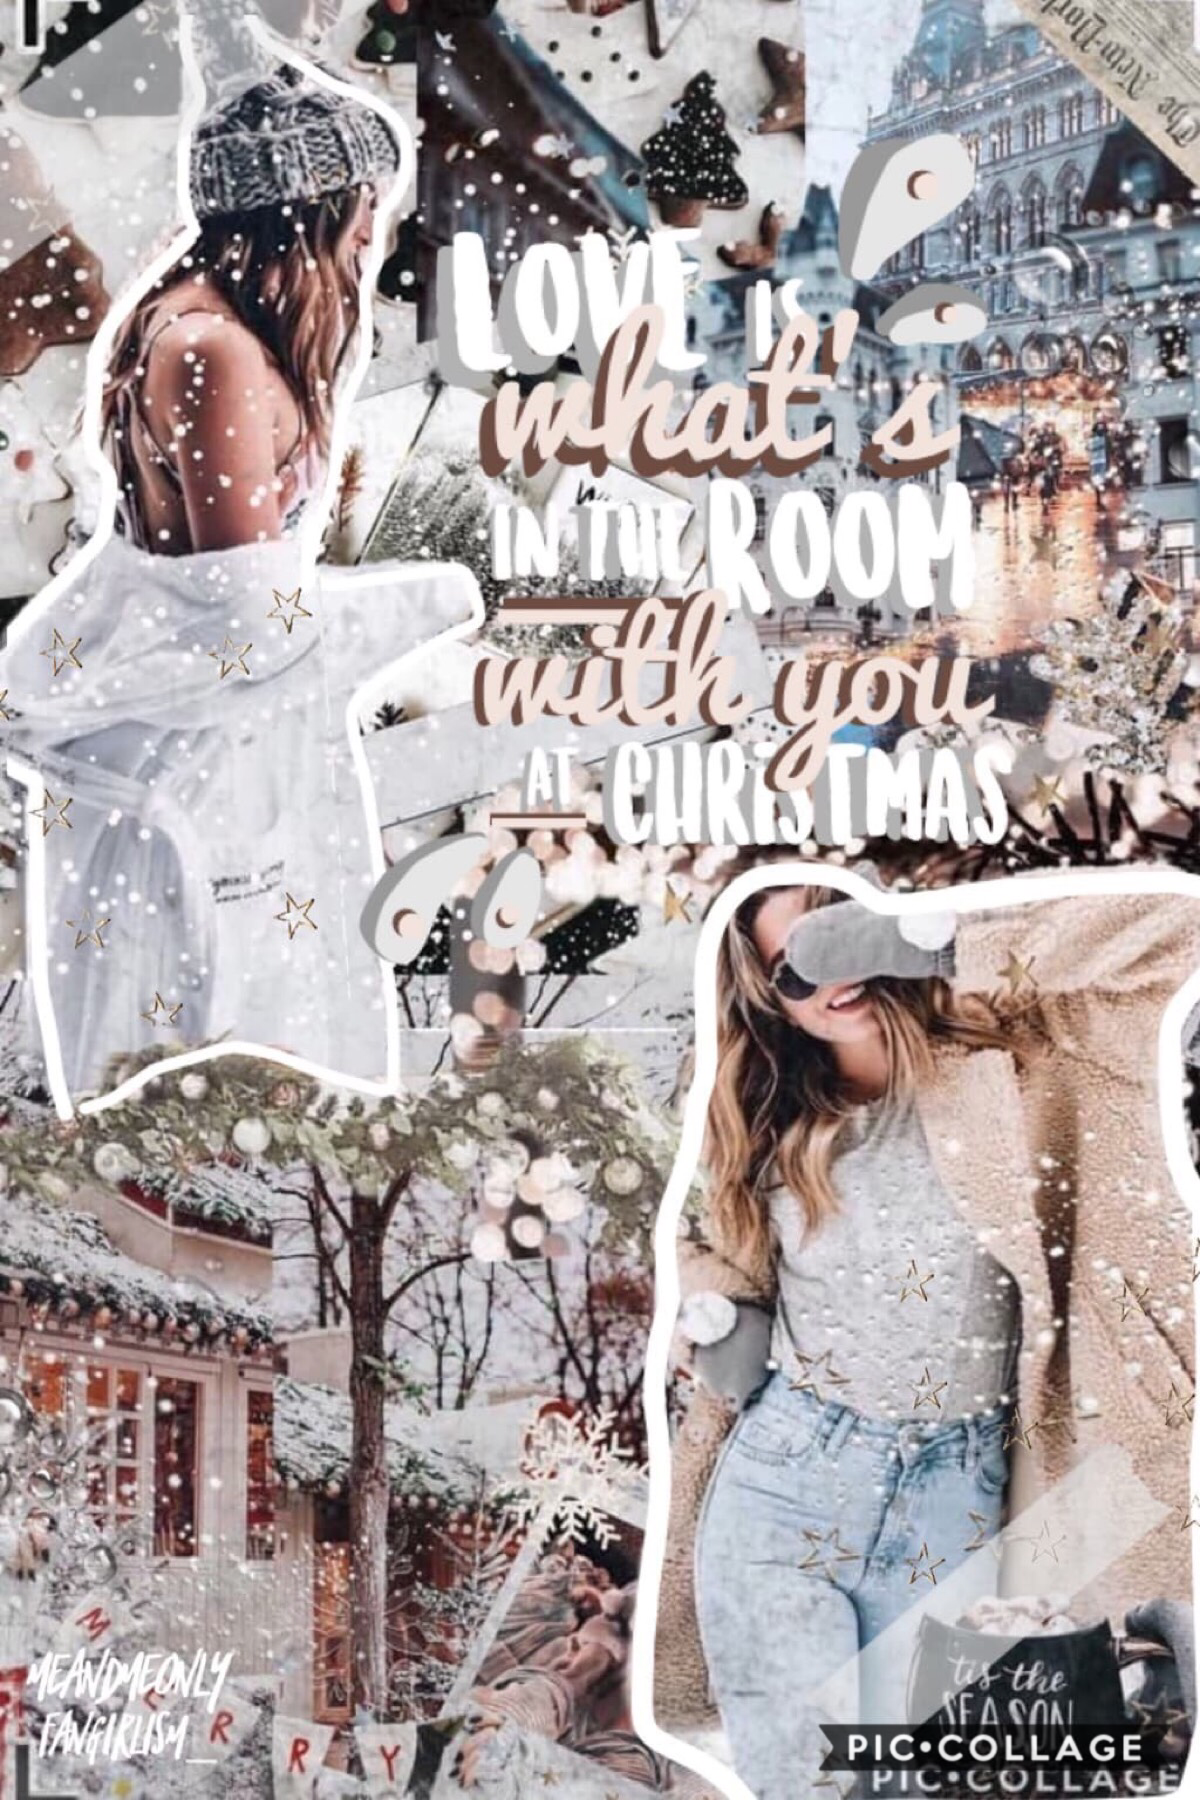 collab with the amazing and talented @Fangirlism_ she did the absolutely stunning text!! loveeee💞💞 also peeps please enter my contest or I’ll have to self advertise lol and I know heaps of people hate self advertising so apologies in advance☺️😖💘